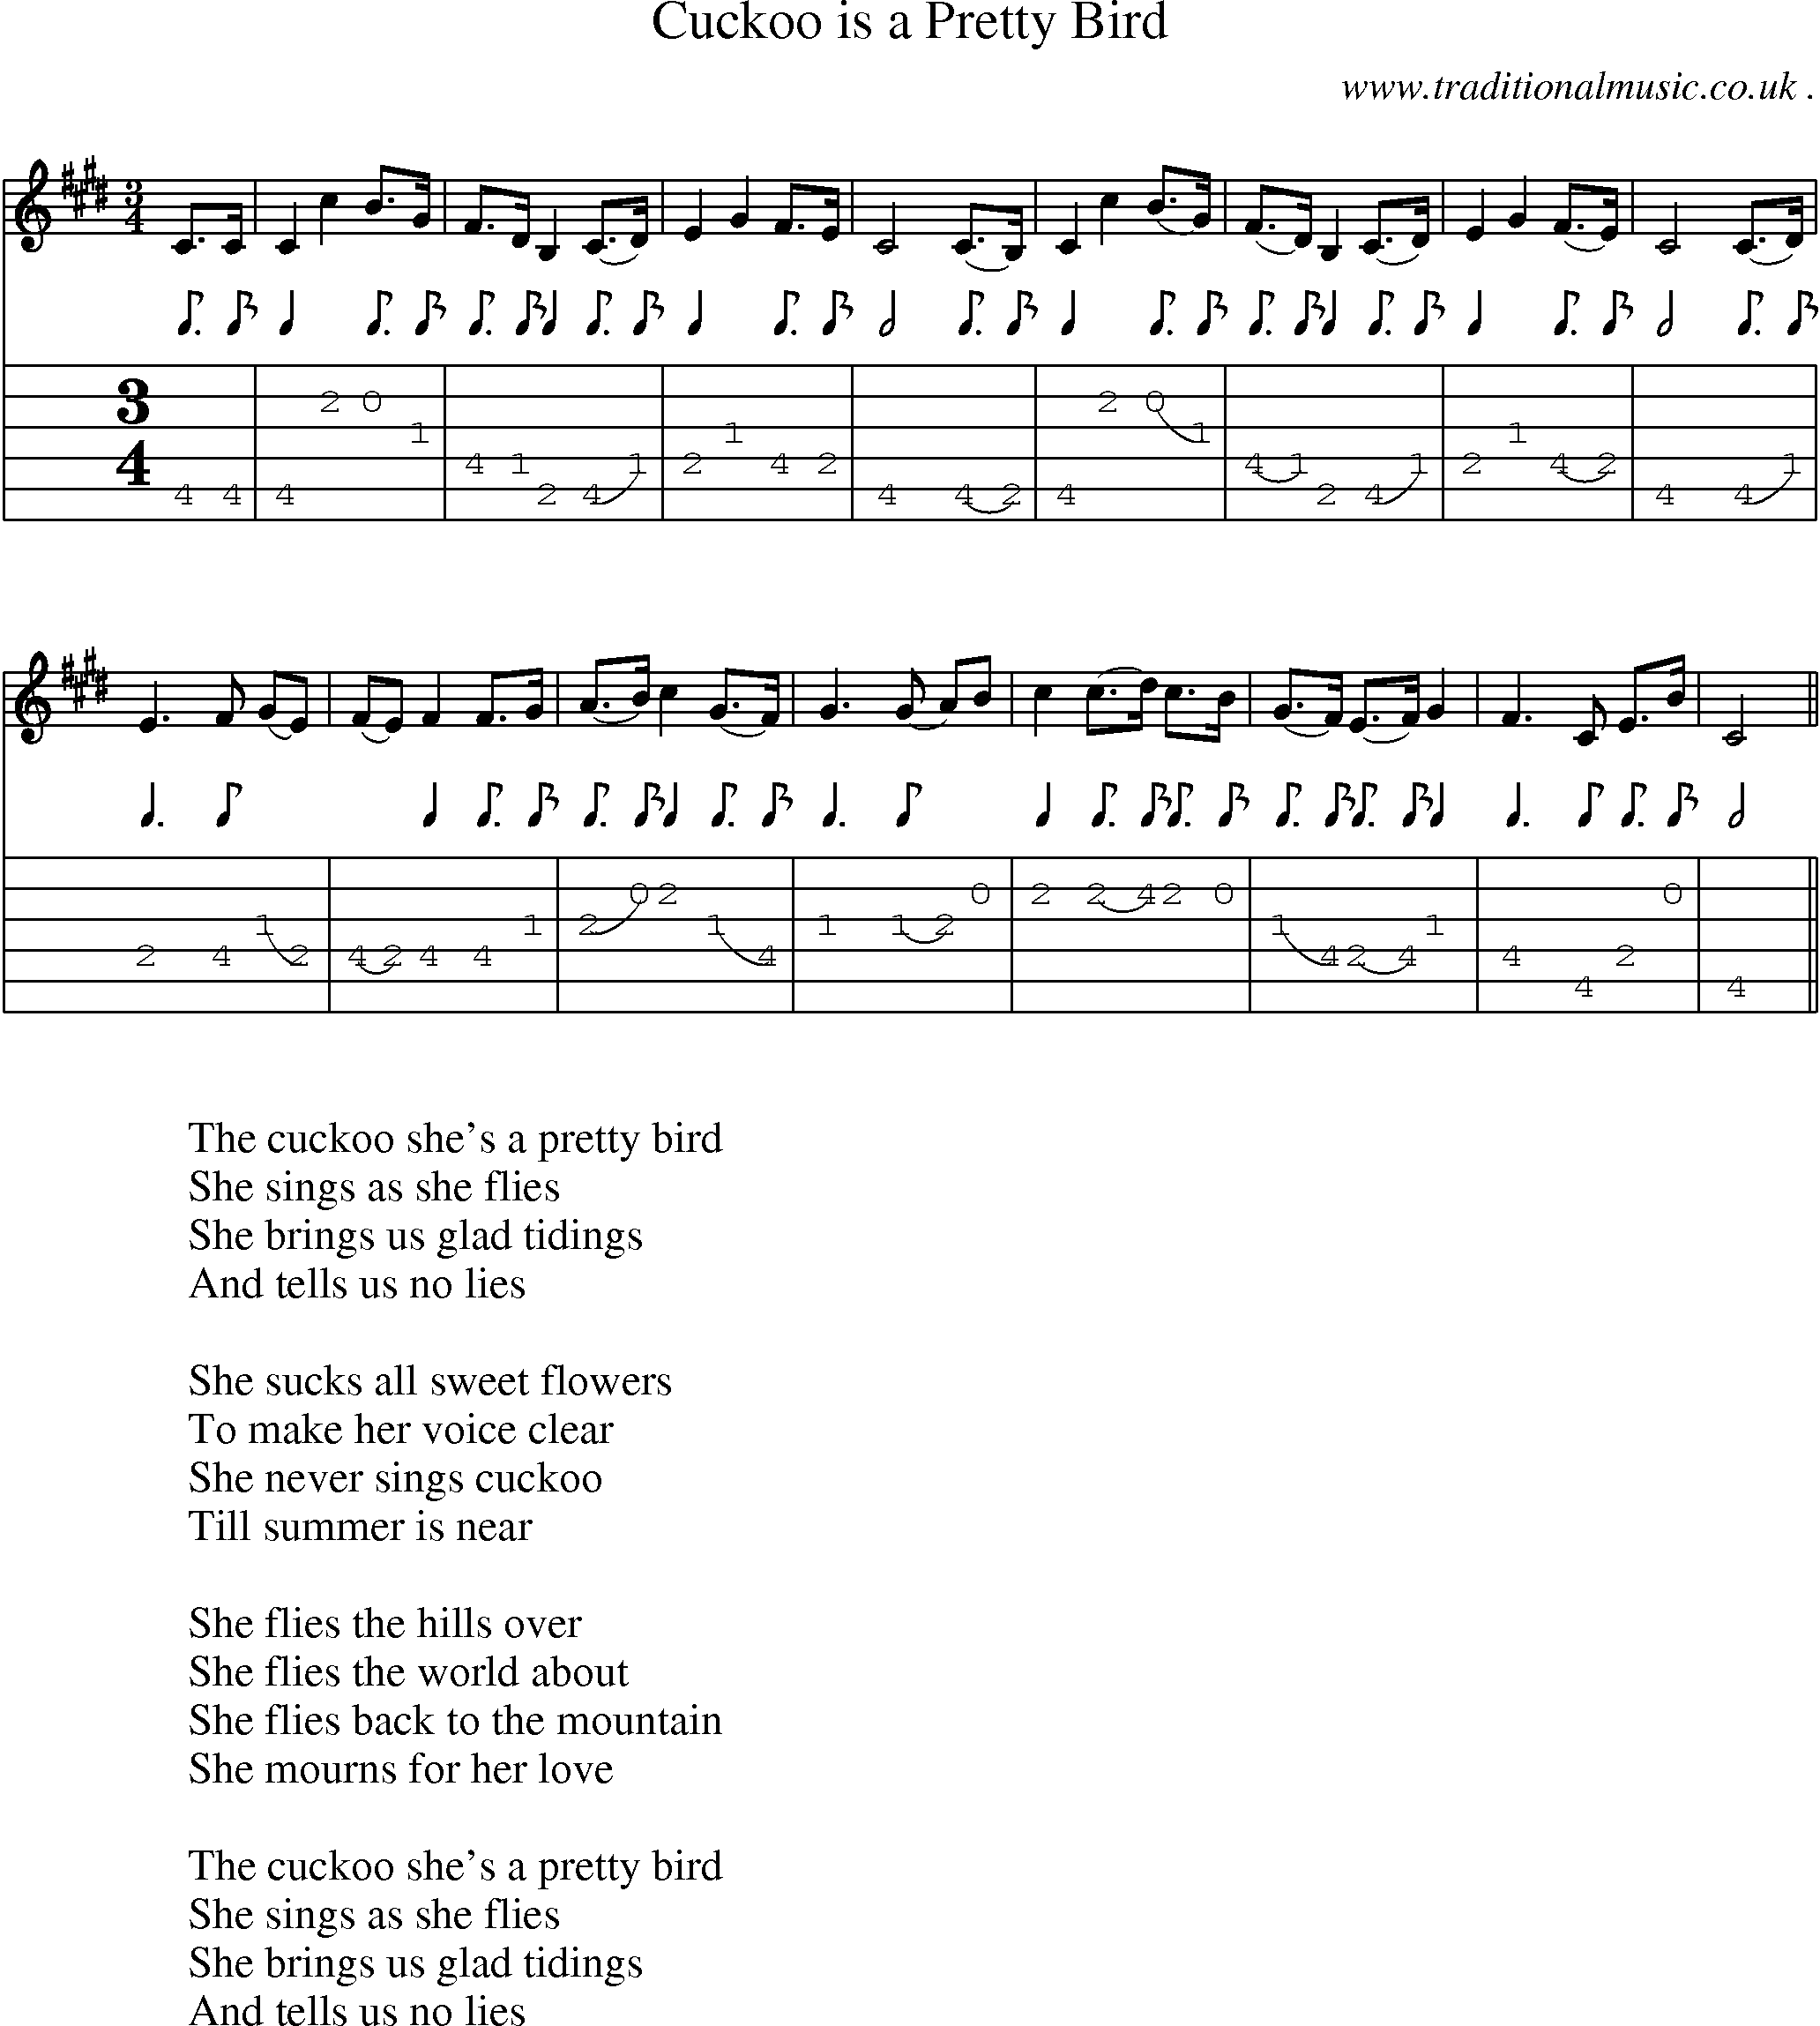 Sheet-Music and Guitar Tabs for Cuckoo Is A Pretty Bird